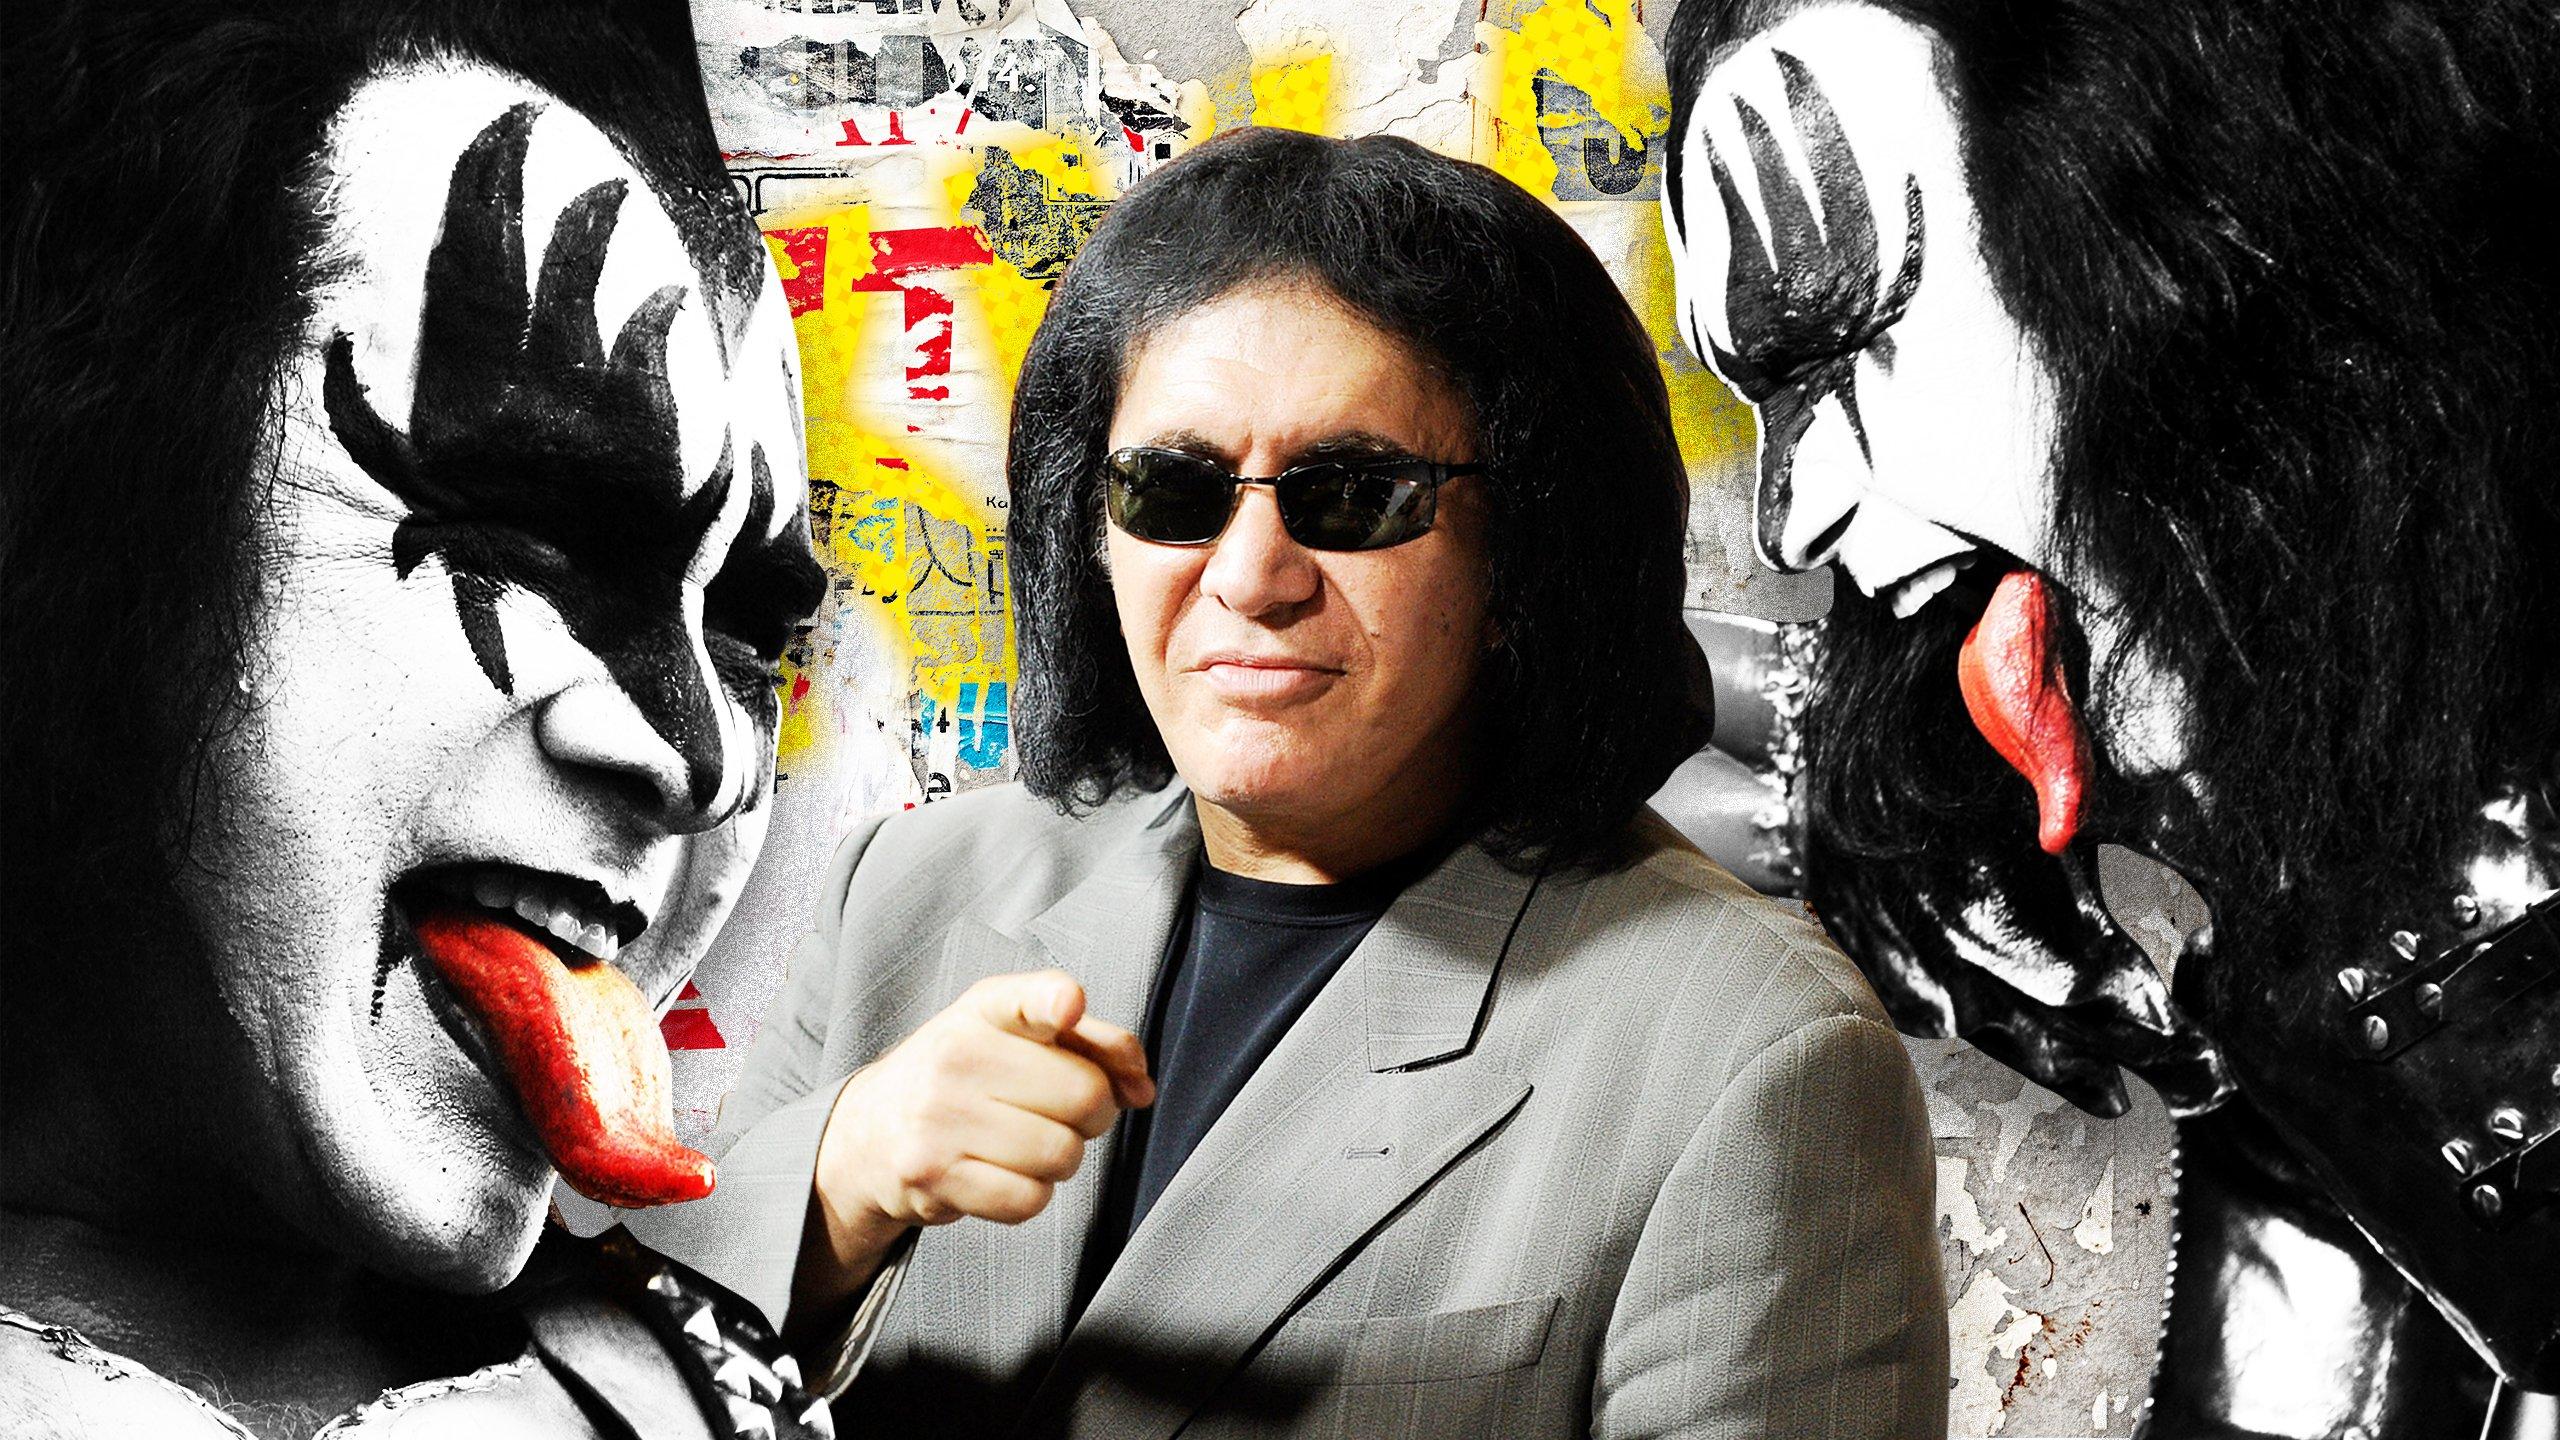 Gene Simmons on Turning Down Trump's Inauguration: 'In This